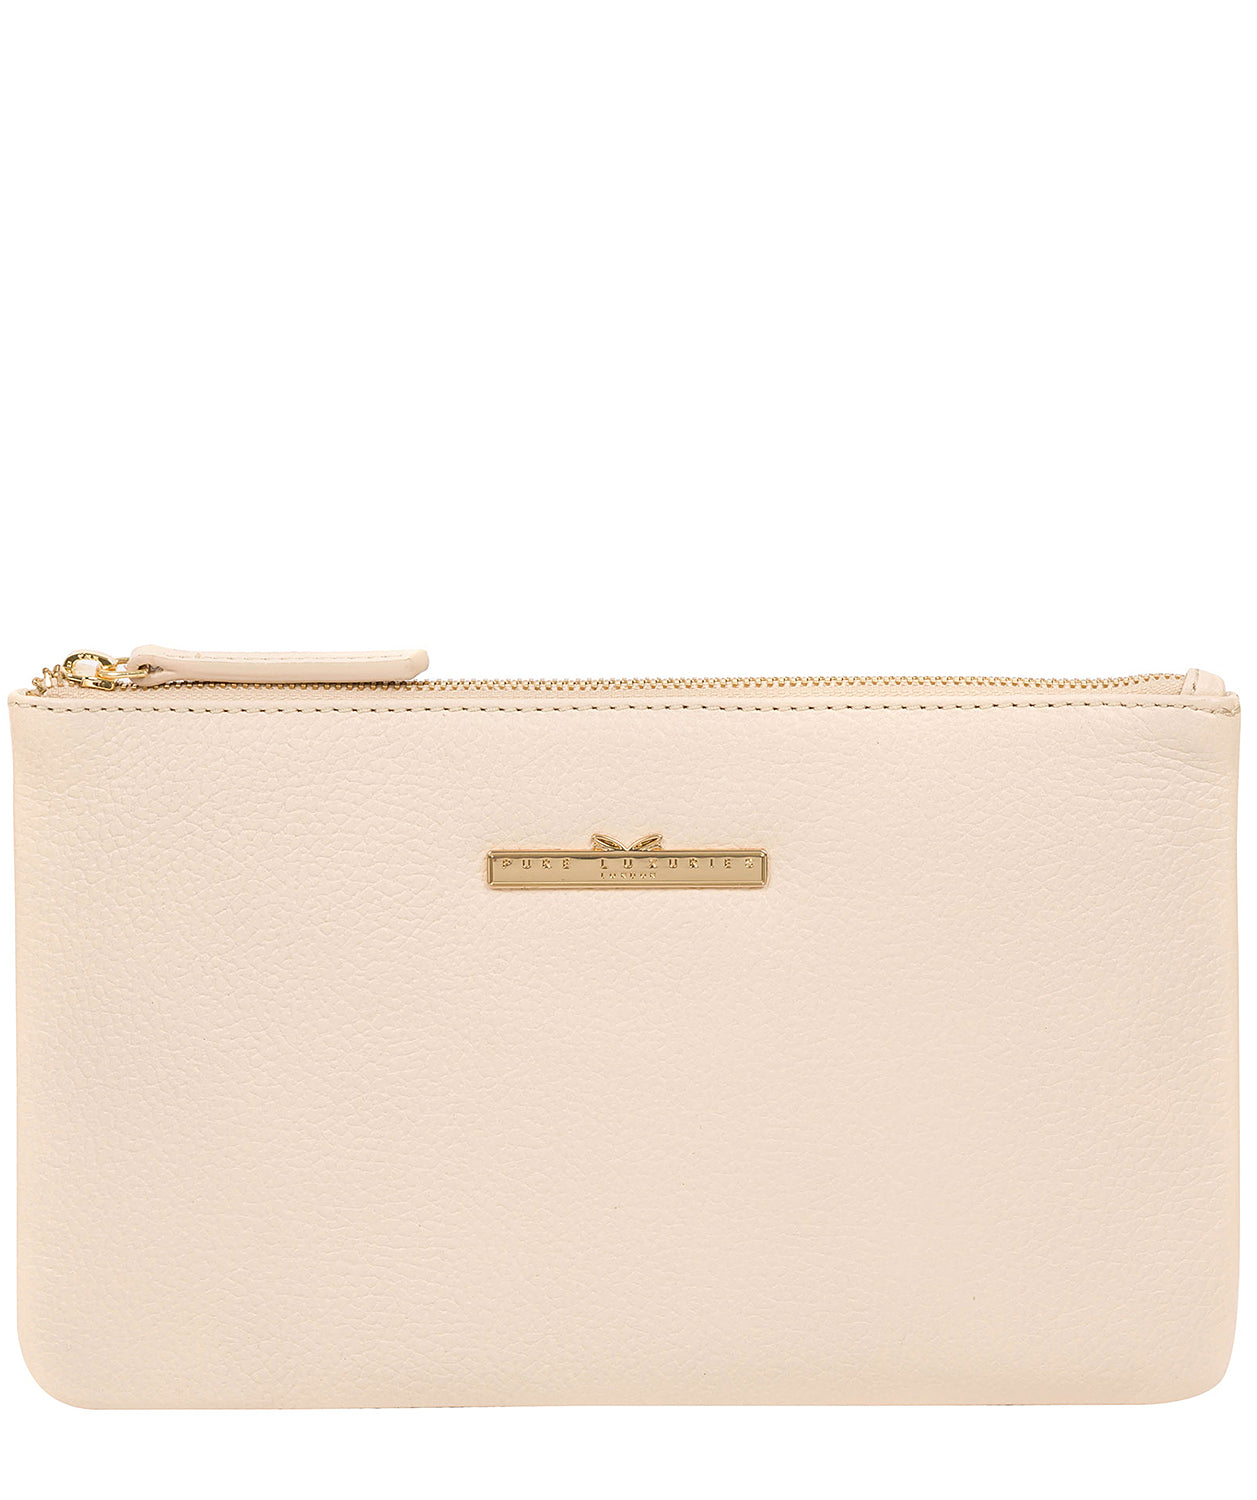 White Leather Clutch Bag 'Arlesey' by Pure Luxuries – Pure Luxuries London